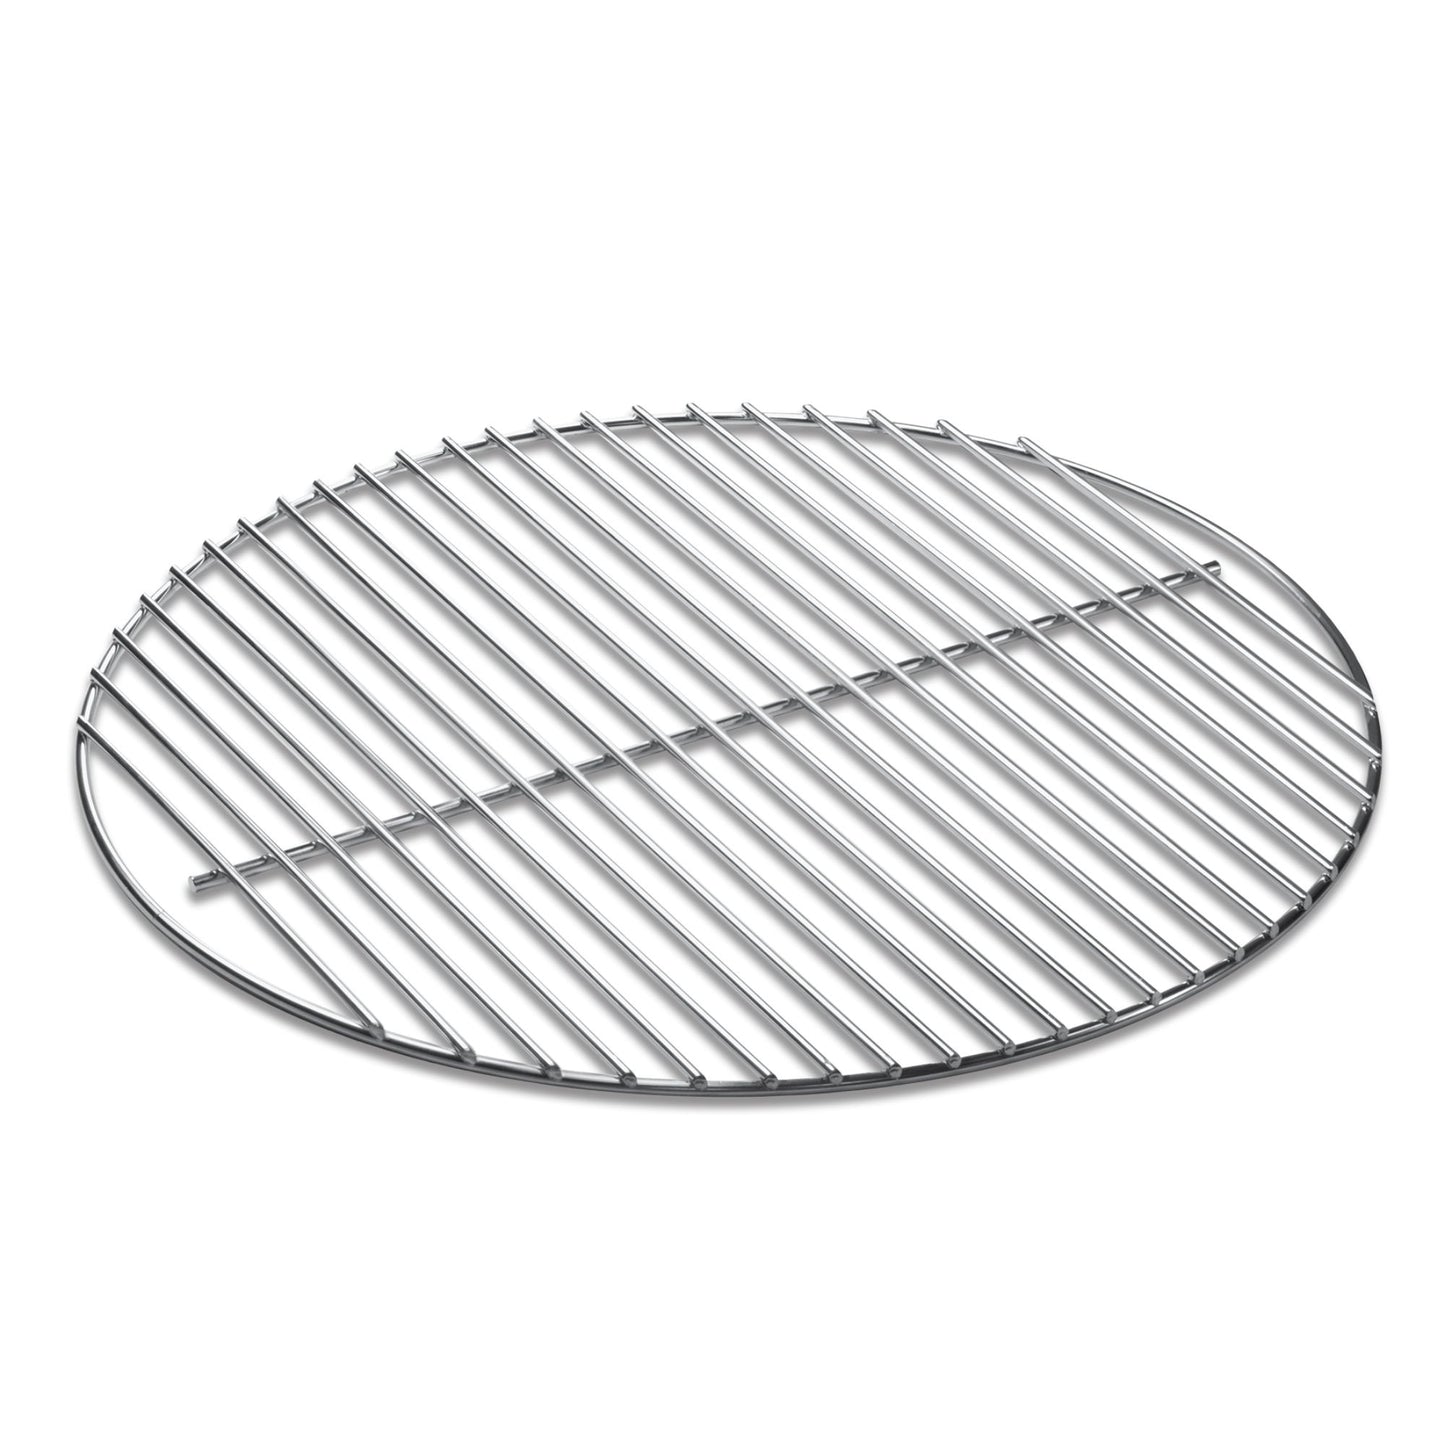 Weber Cooking Grate for 14" Charcoal Grills